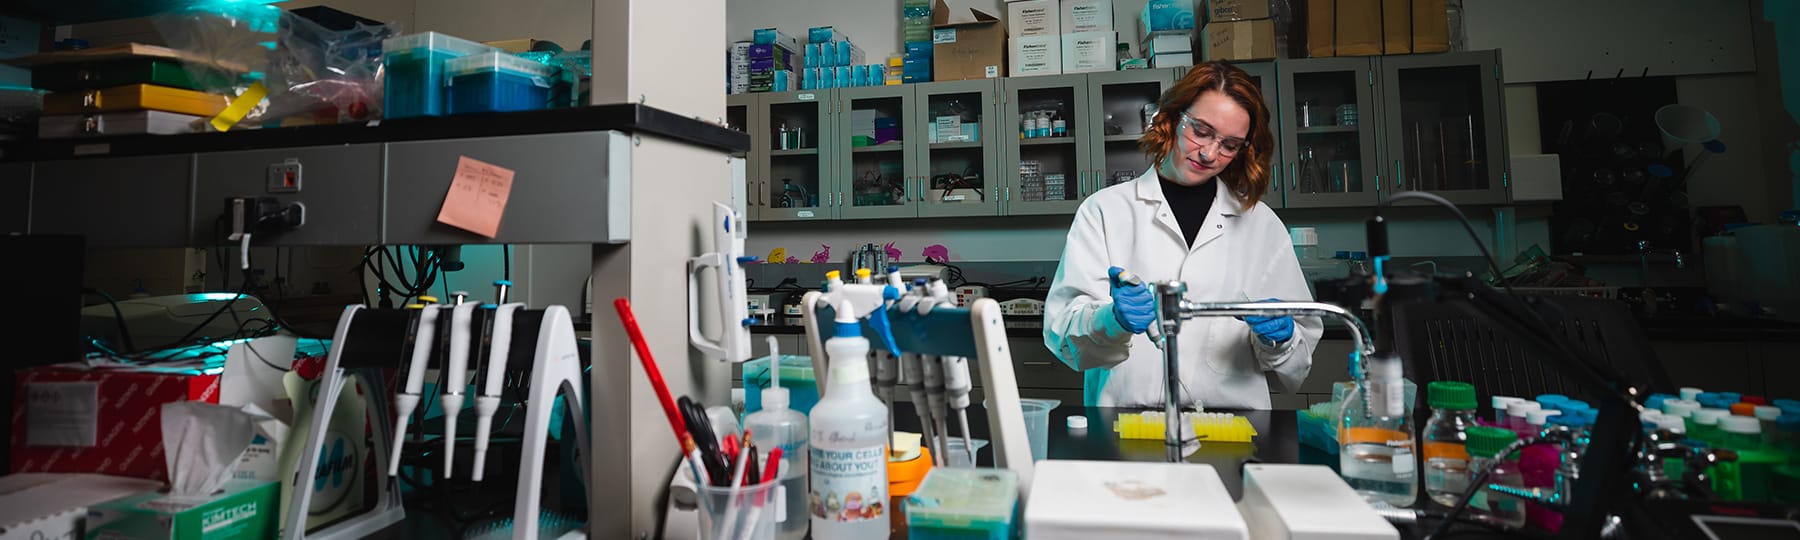 A pre-dentistry student works in a lab on Central Michigan University's campus.